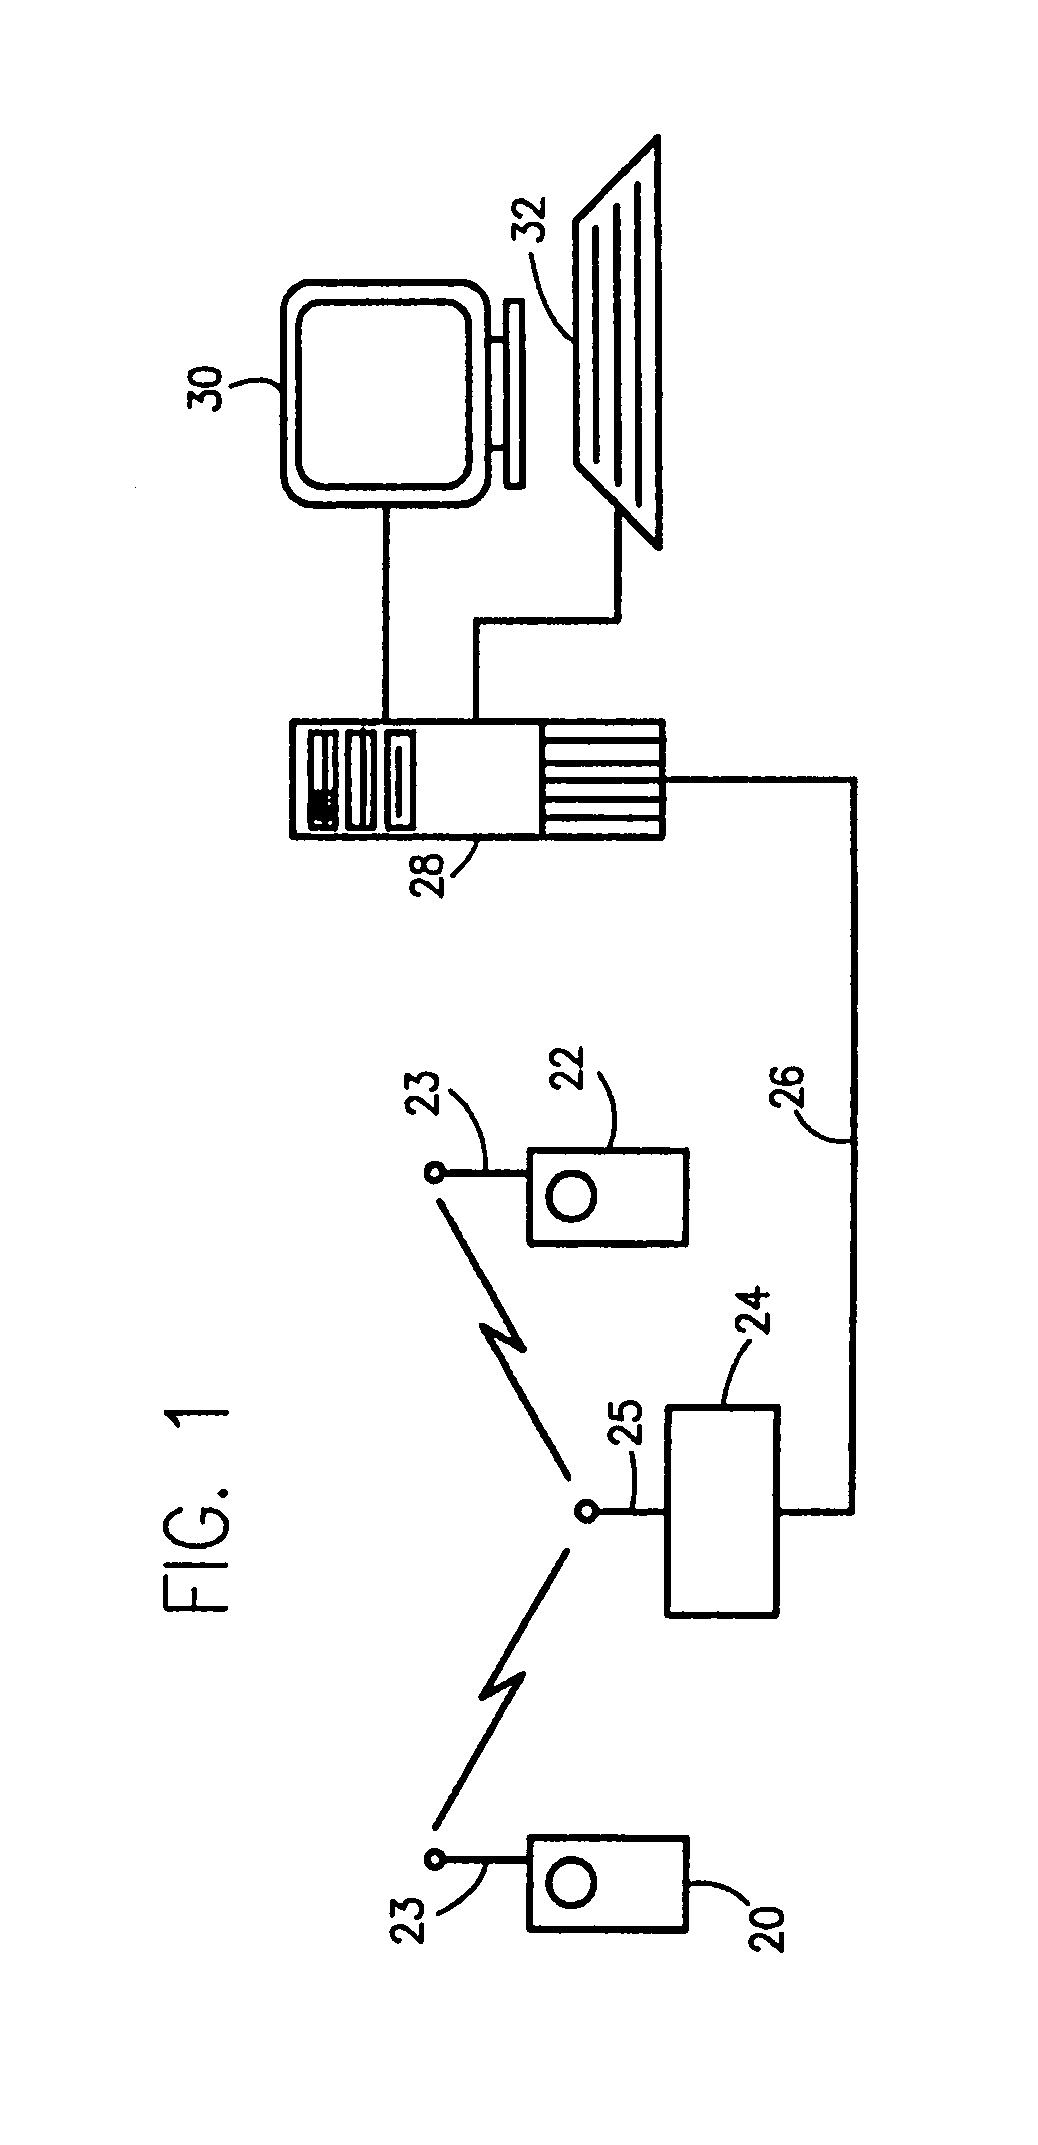 Multimedia surveillance and monitoring system including network configuration